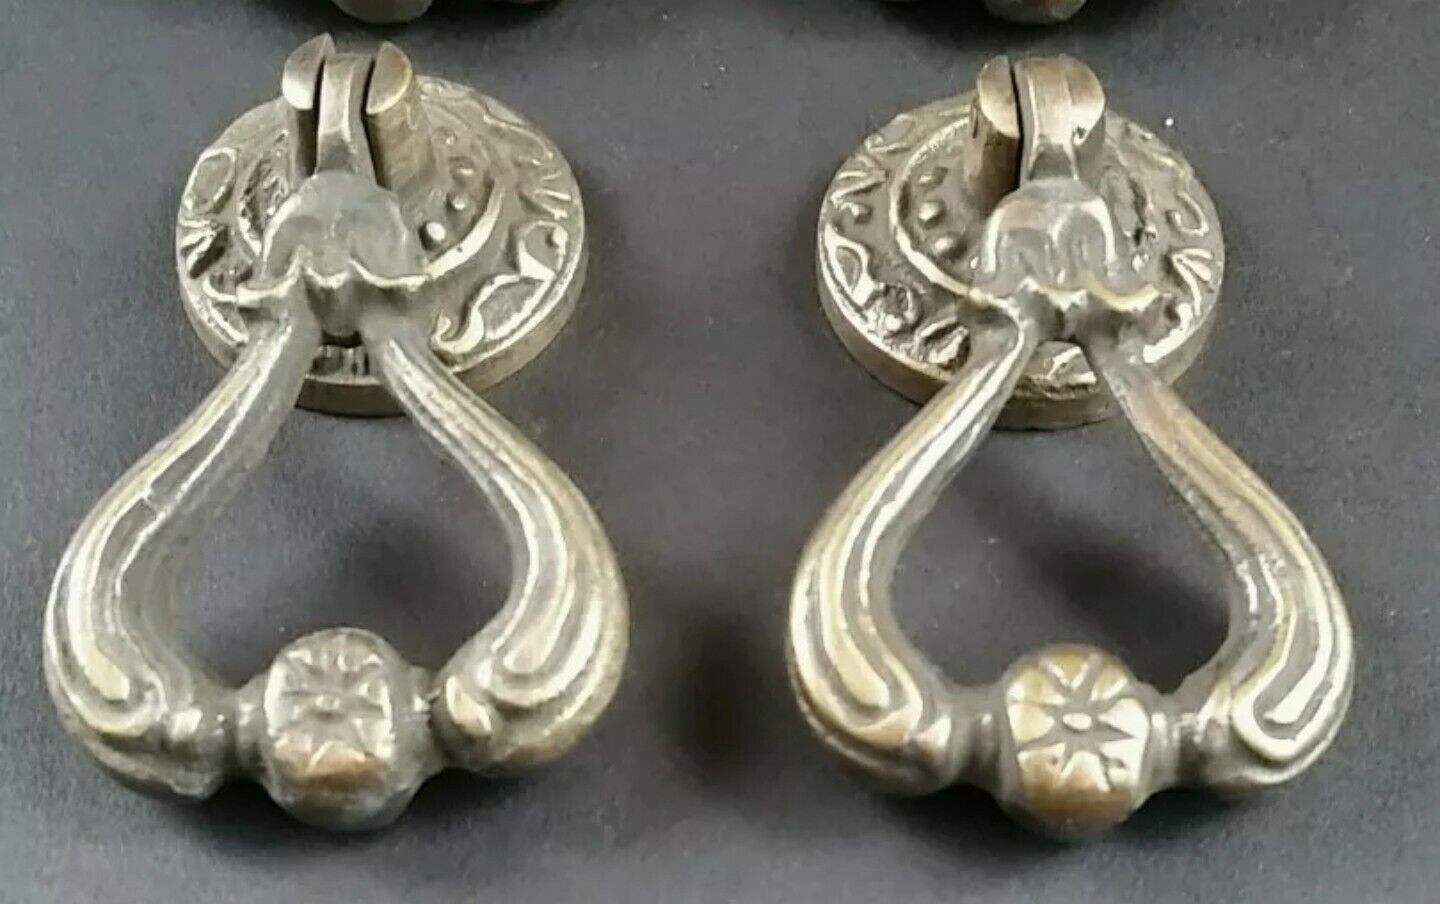 2 Ornate Brass Antique Style Handles Pulls Knob w Detailed Drop Ring 2-1/4" #H11